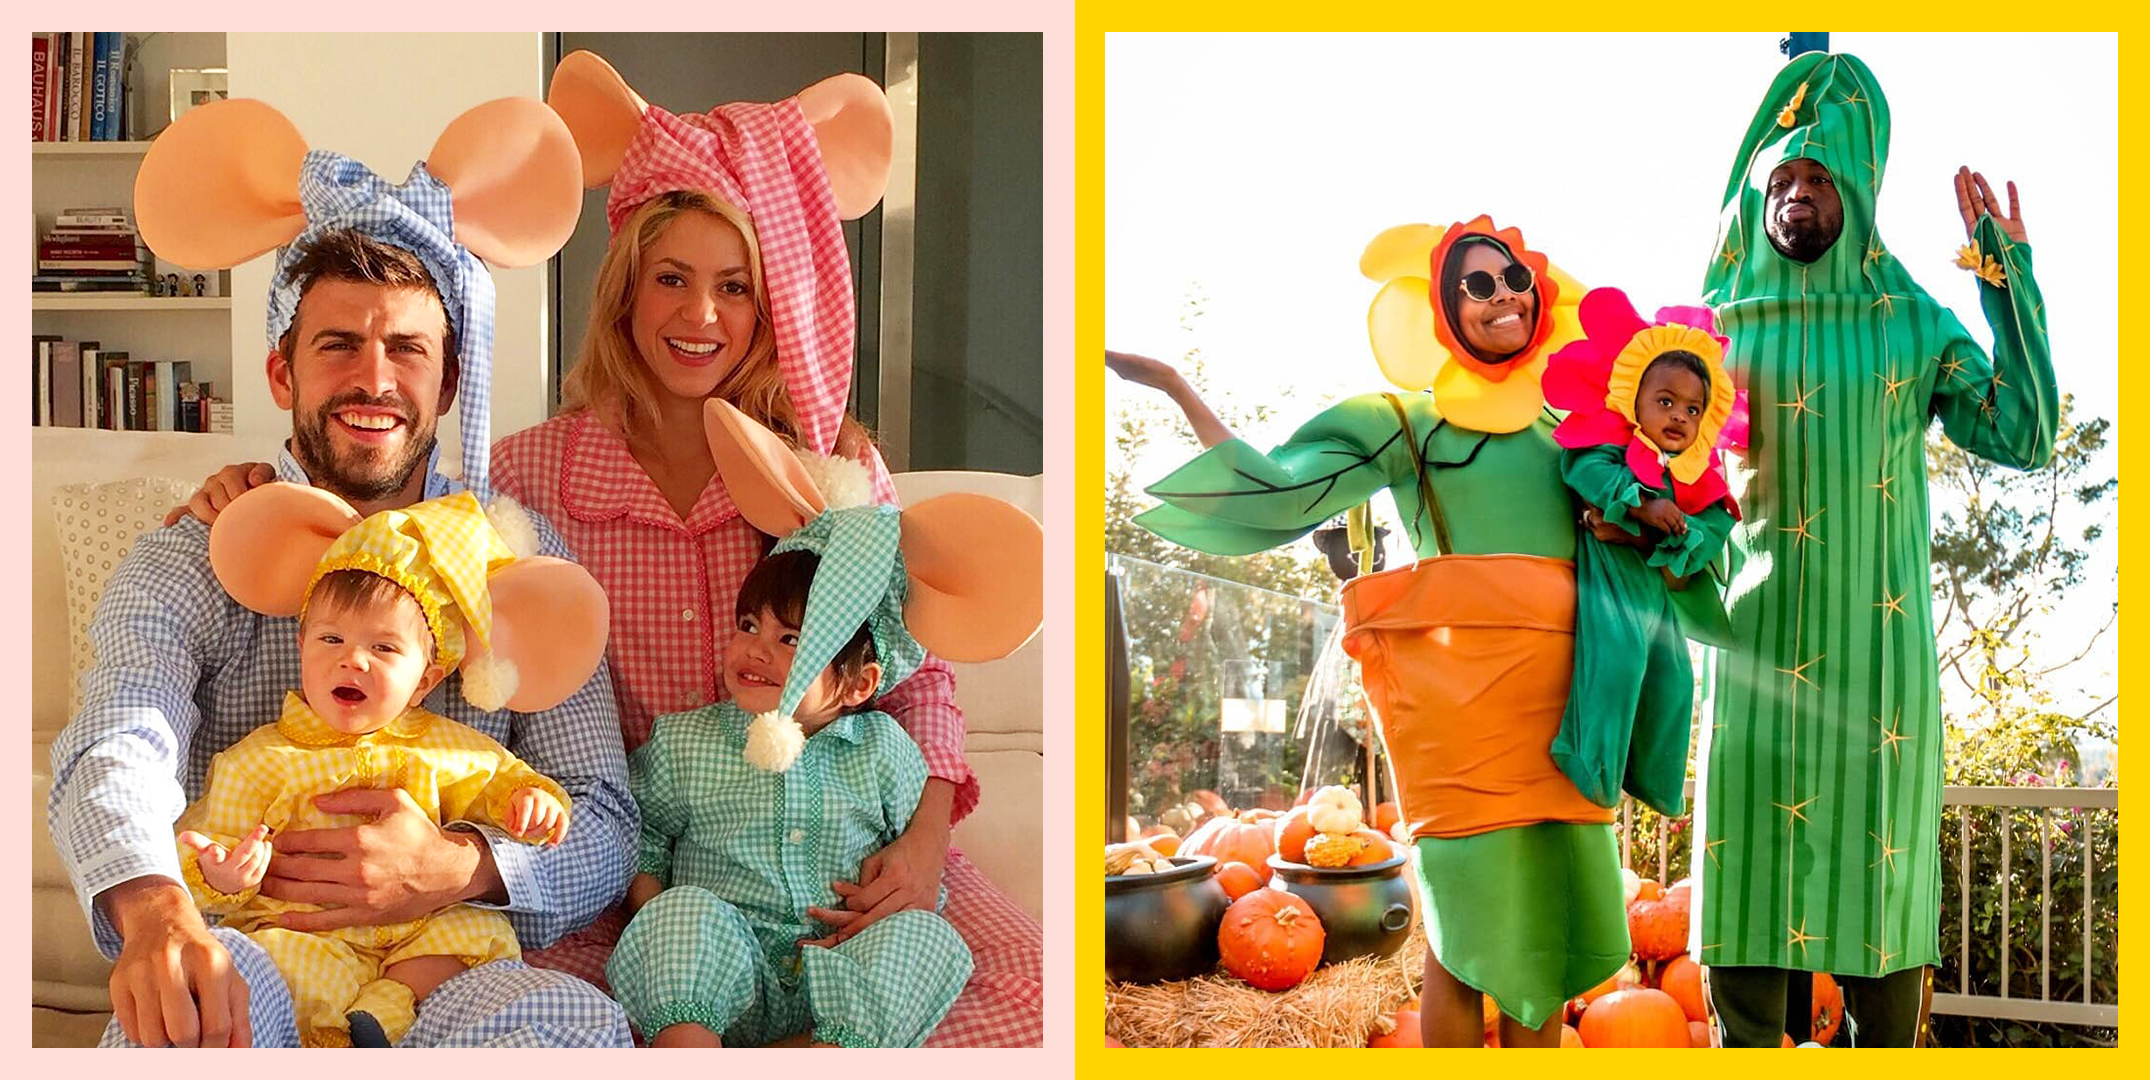 https://hips.hearstapps.com/hmg-prod/images/mom-baby-halloween-costume-ideas-1598462156.png